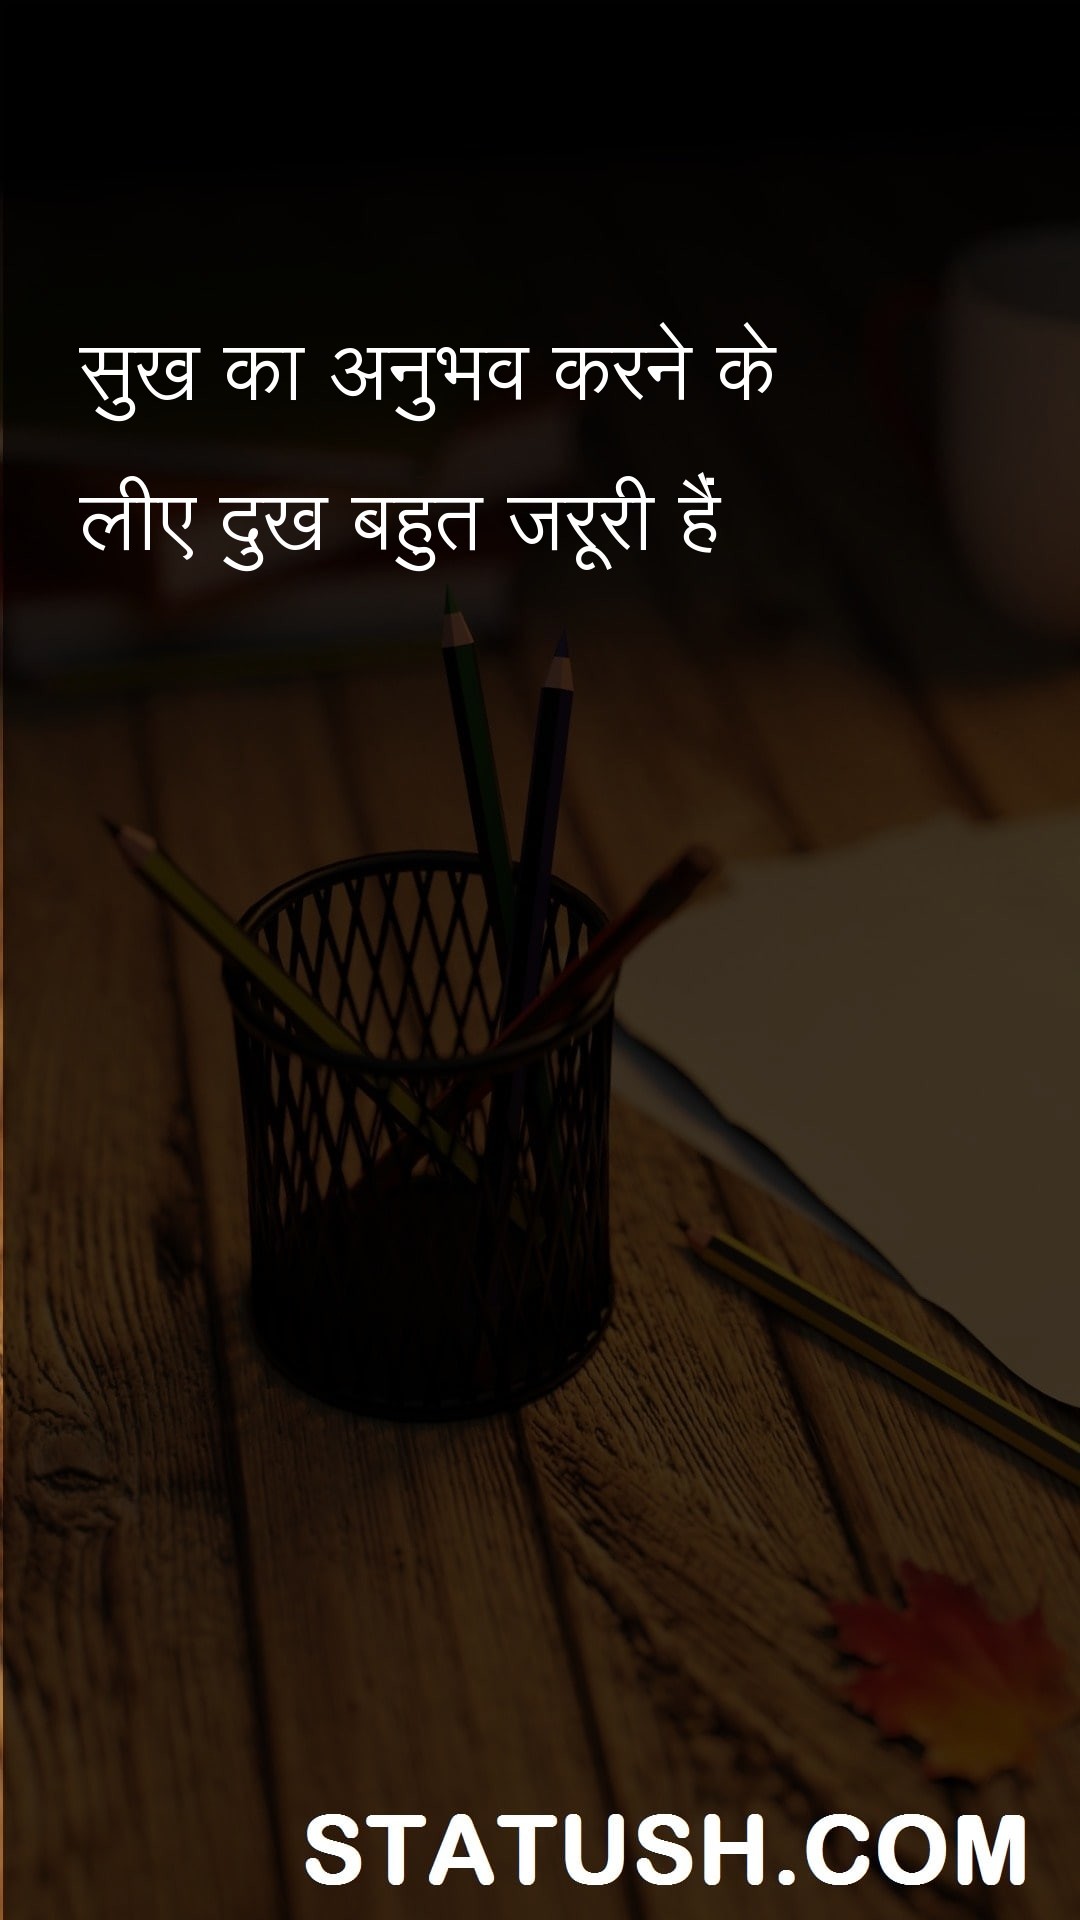 Suffering is very important - Hindi Quotes at statush.com